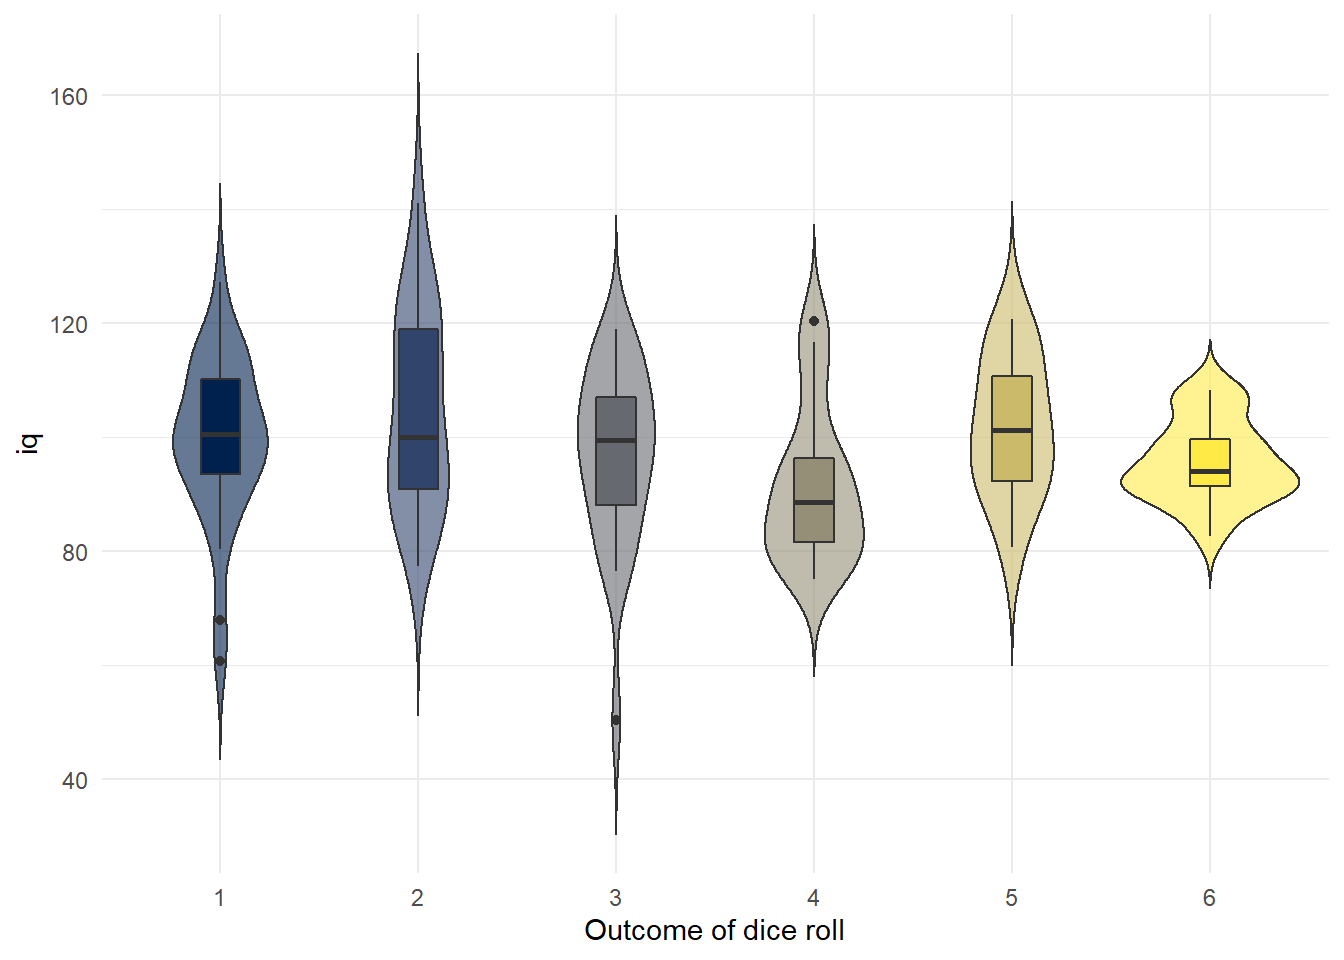 Boxplot of IQ scores grouped by what each person rolled on the die